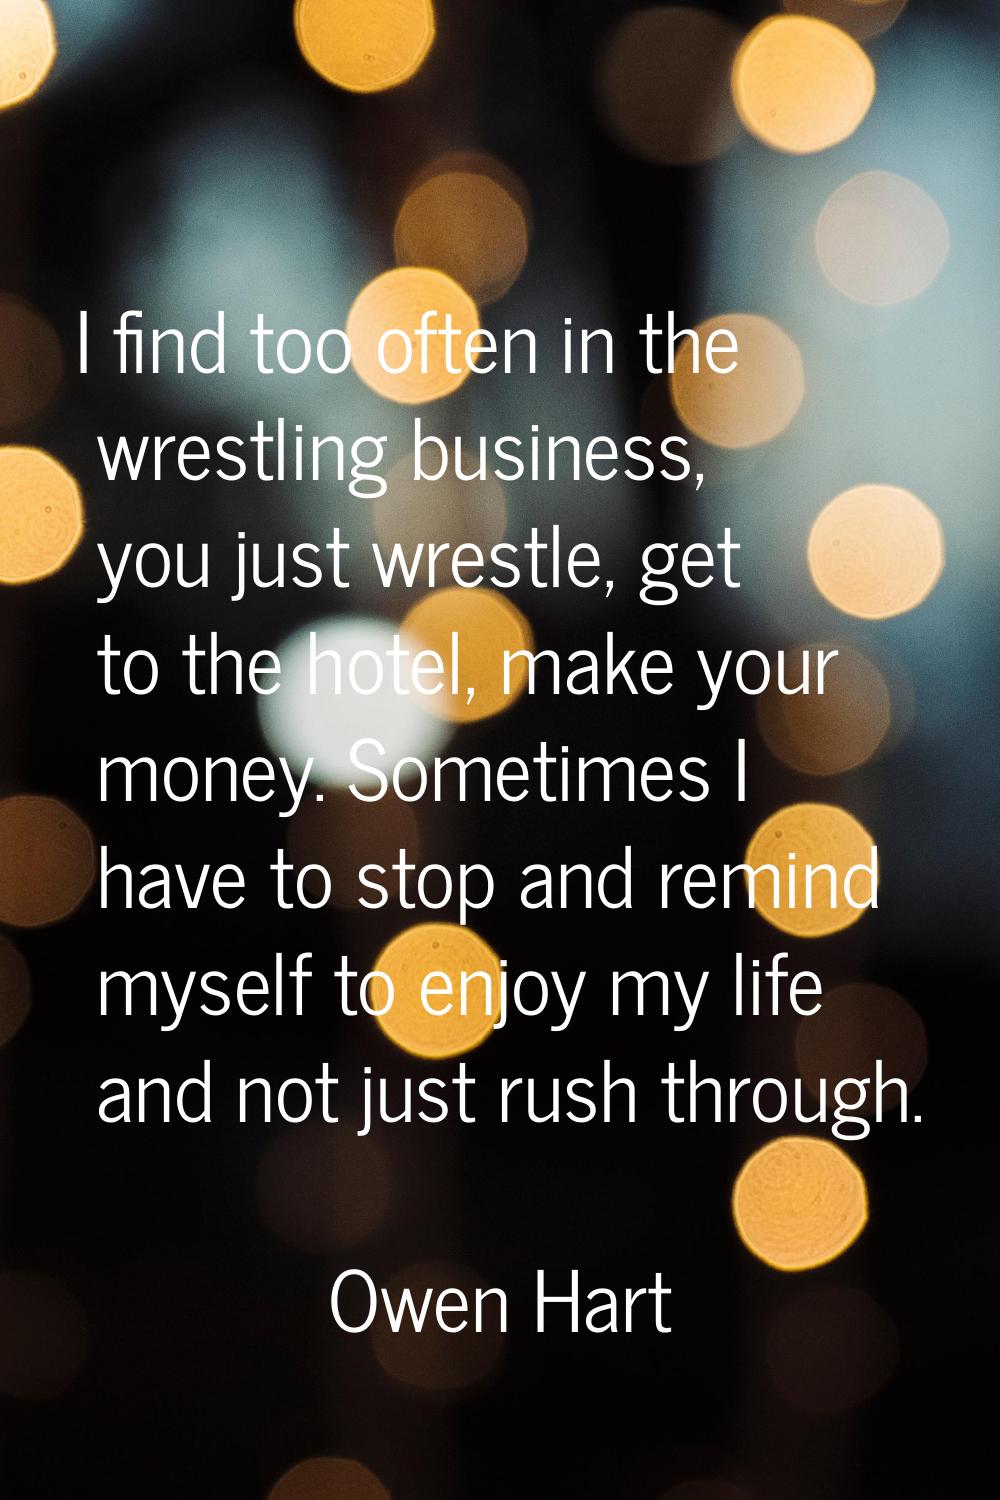 I find too often in the wrestling business, you just wrestle, get to the hotel, make your money. So